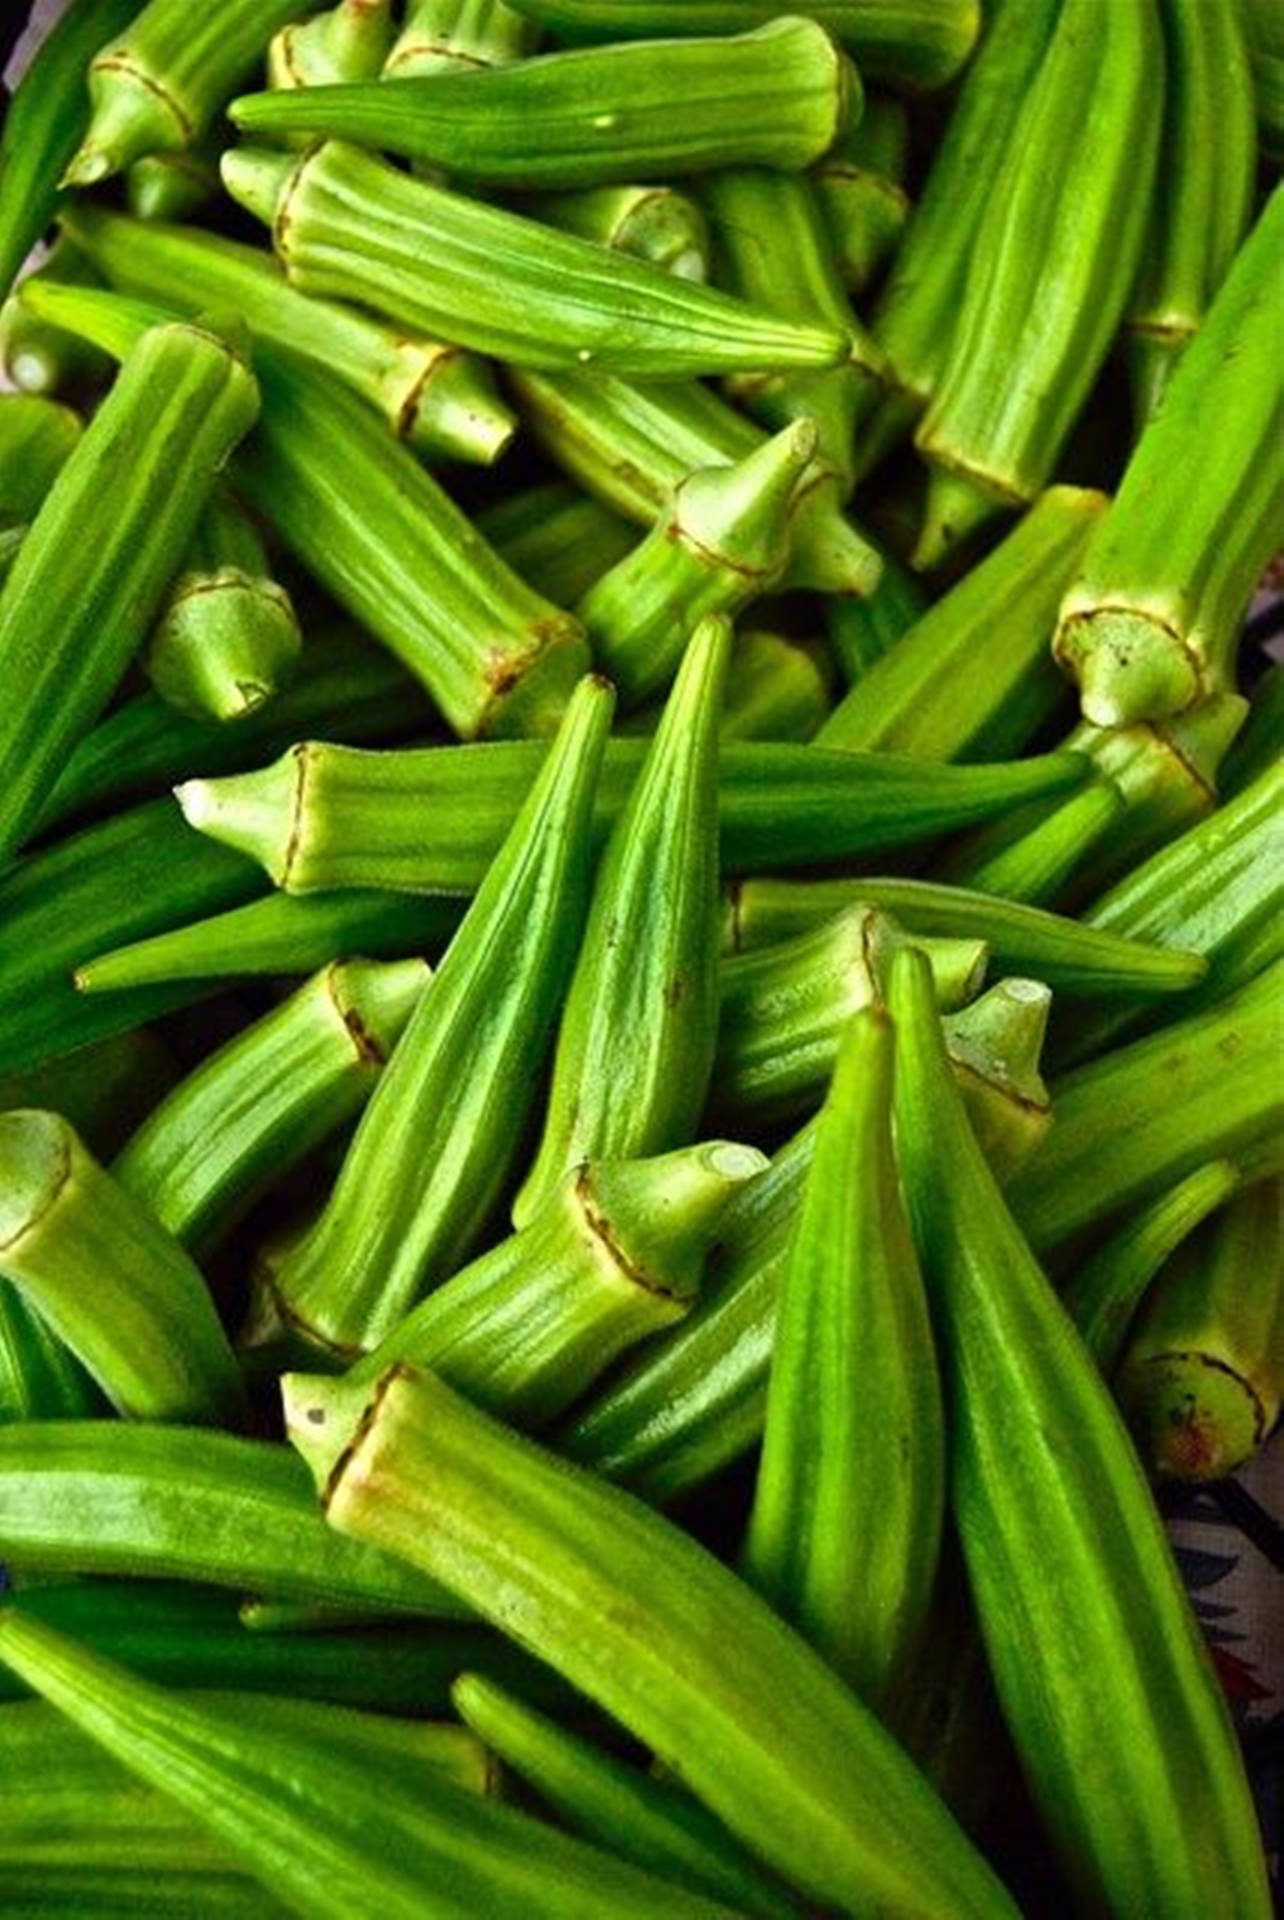 Råagröna Okra Grönsaker. (this Doesn't Make Sense In The Context Of Computer Or Mobile Wallpaper. Is There A Specific Phrase You Would Like Me To Translate?) Wallpaper